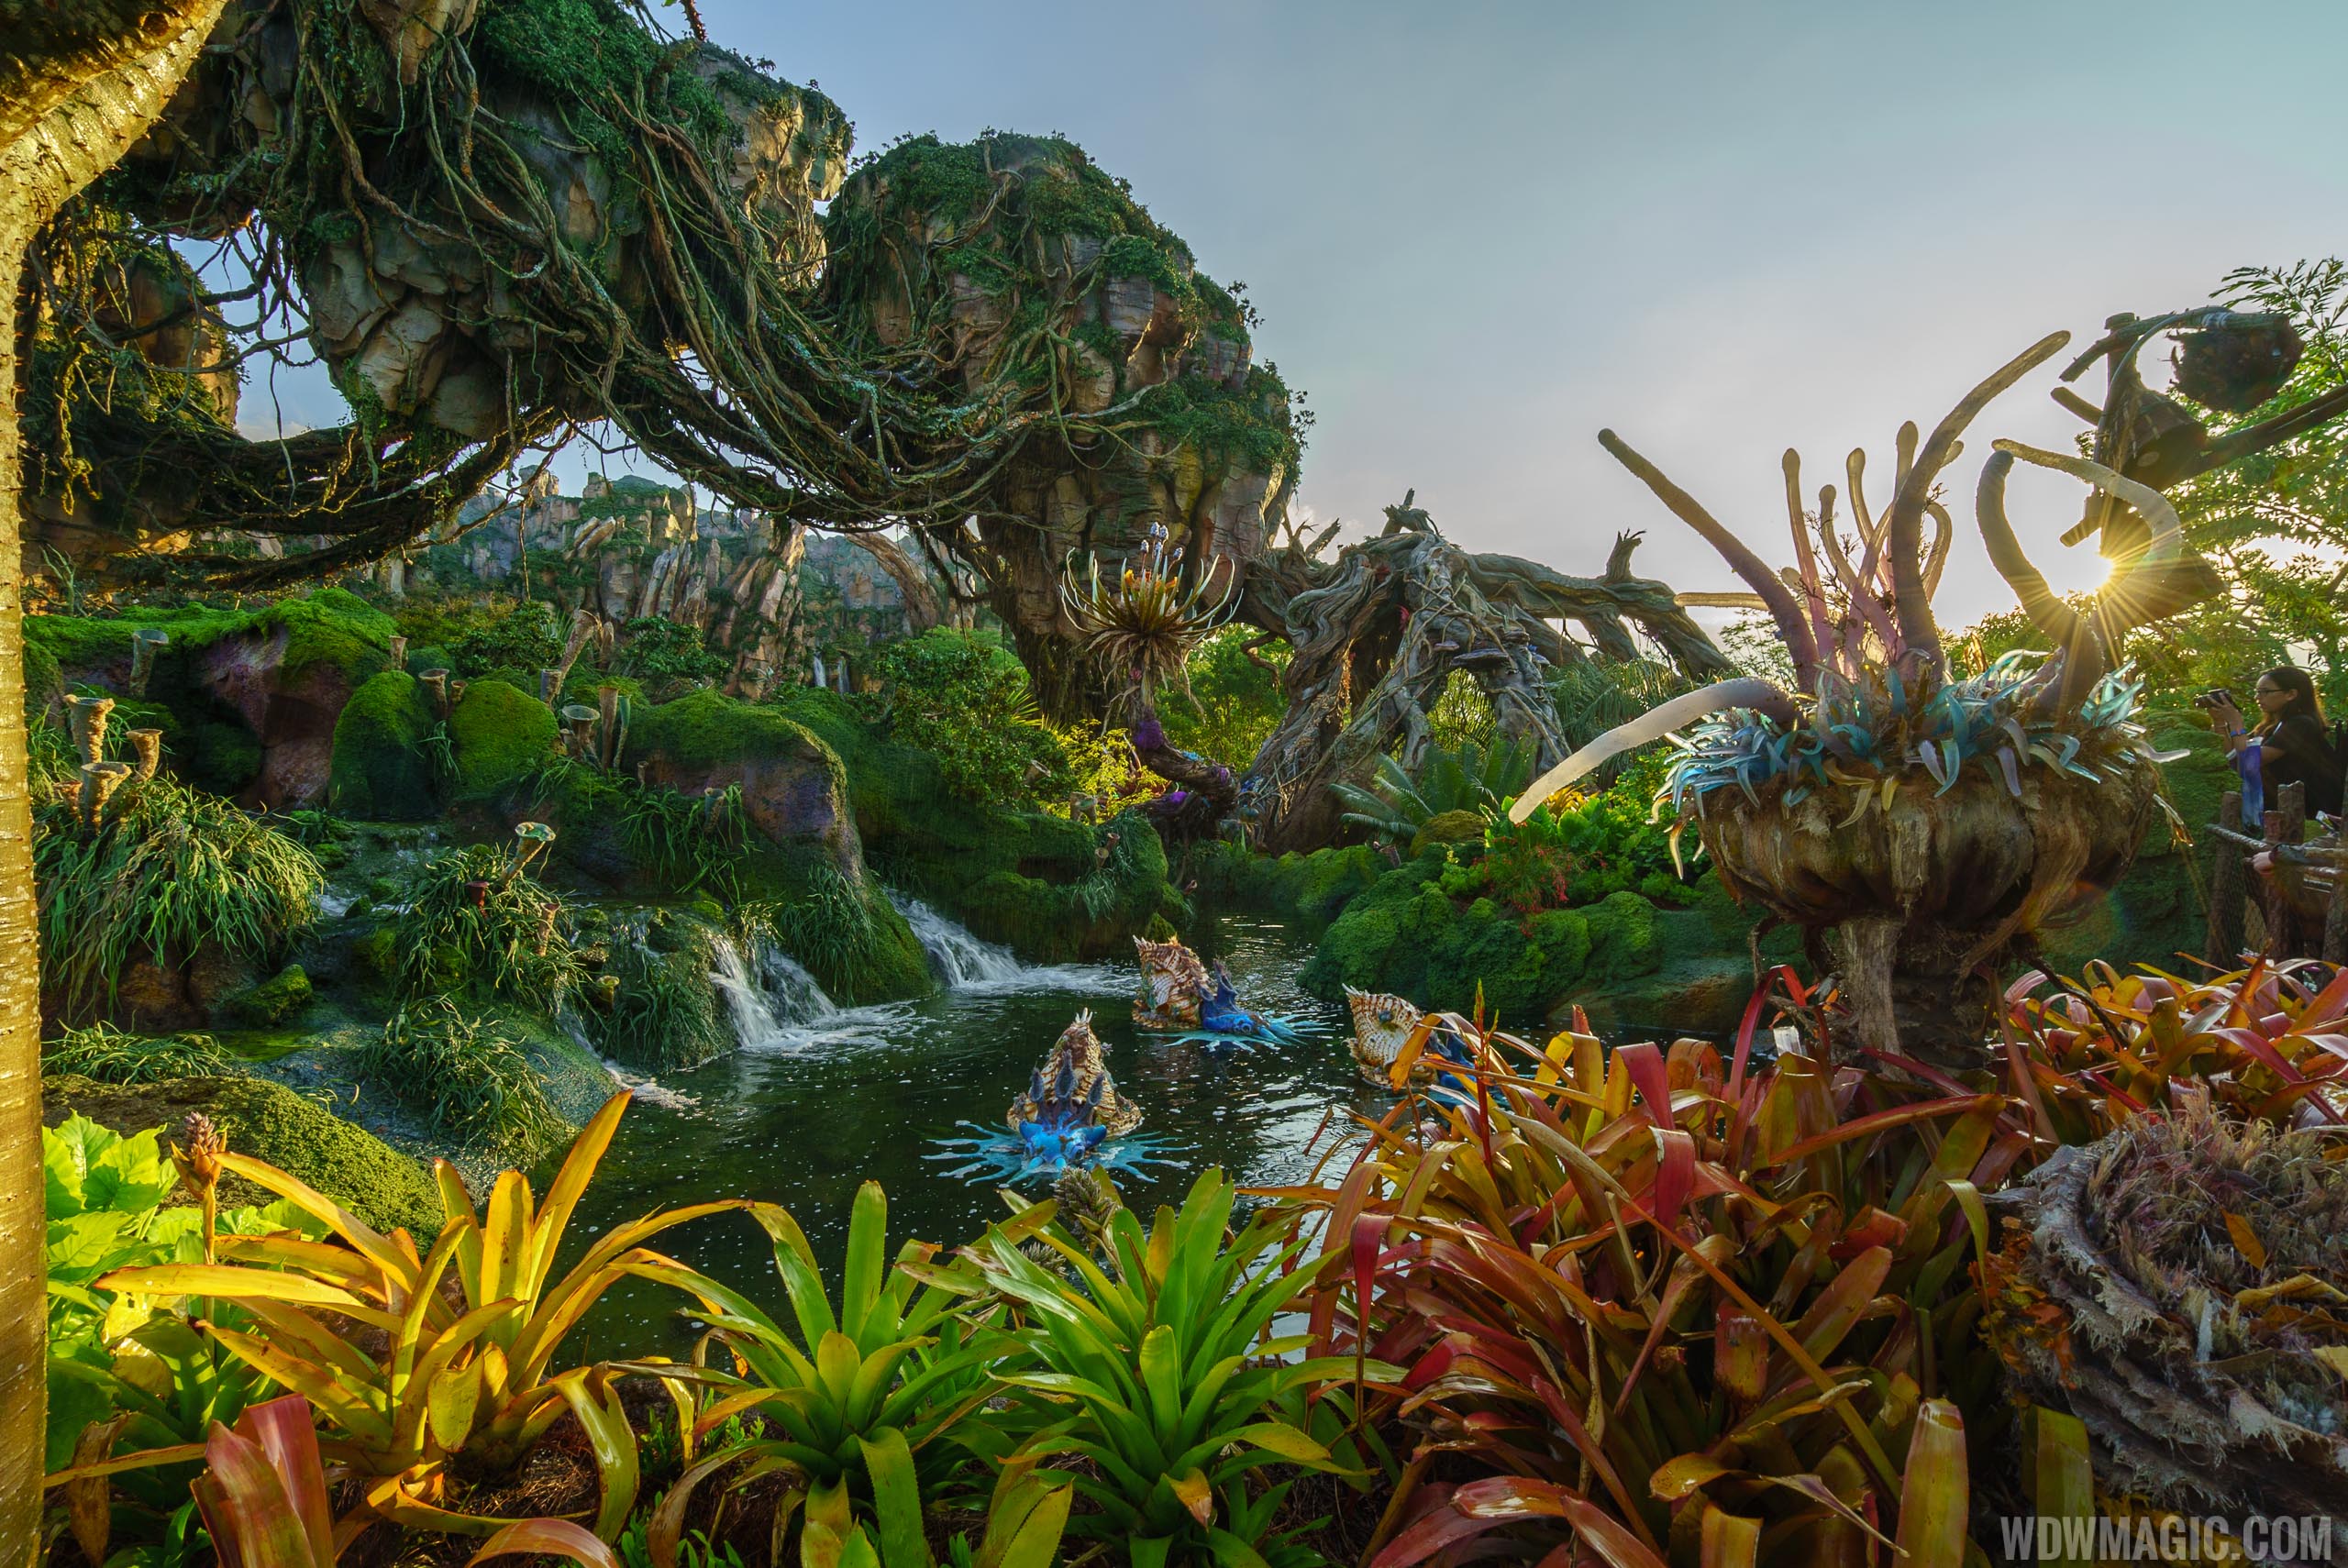 Disney's Animal Kingdom will be open for 12 hours